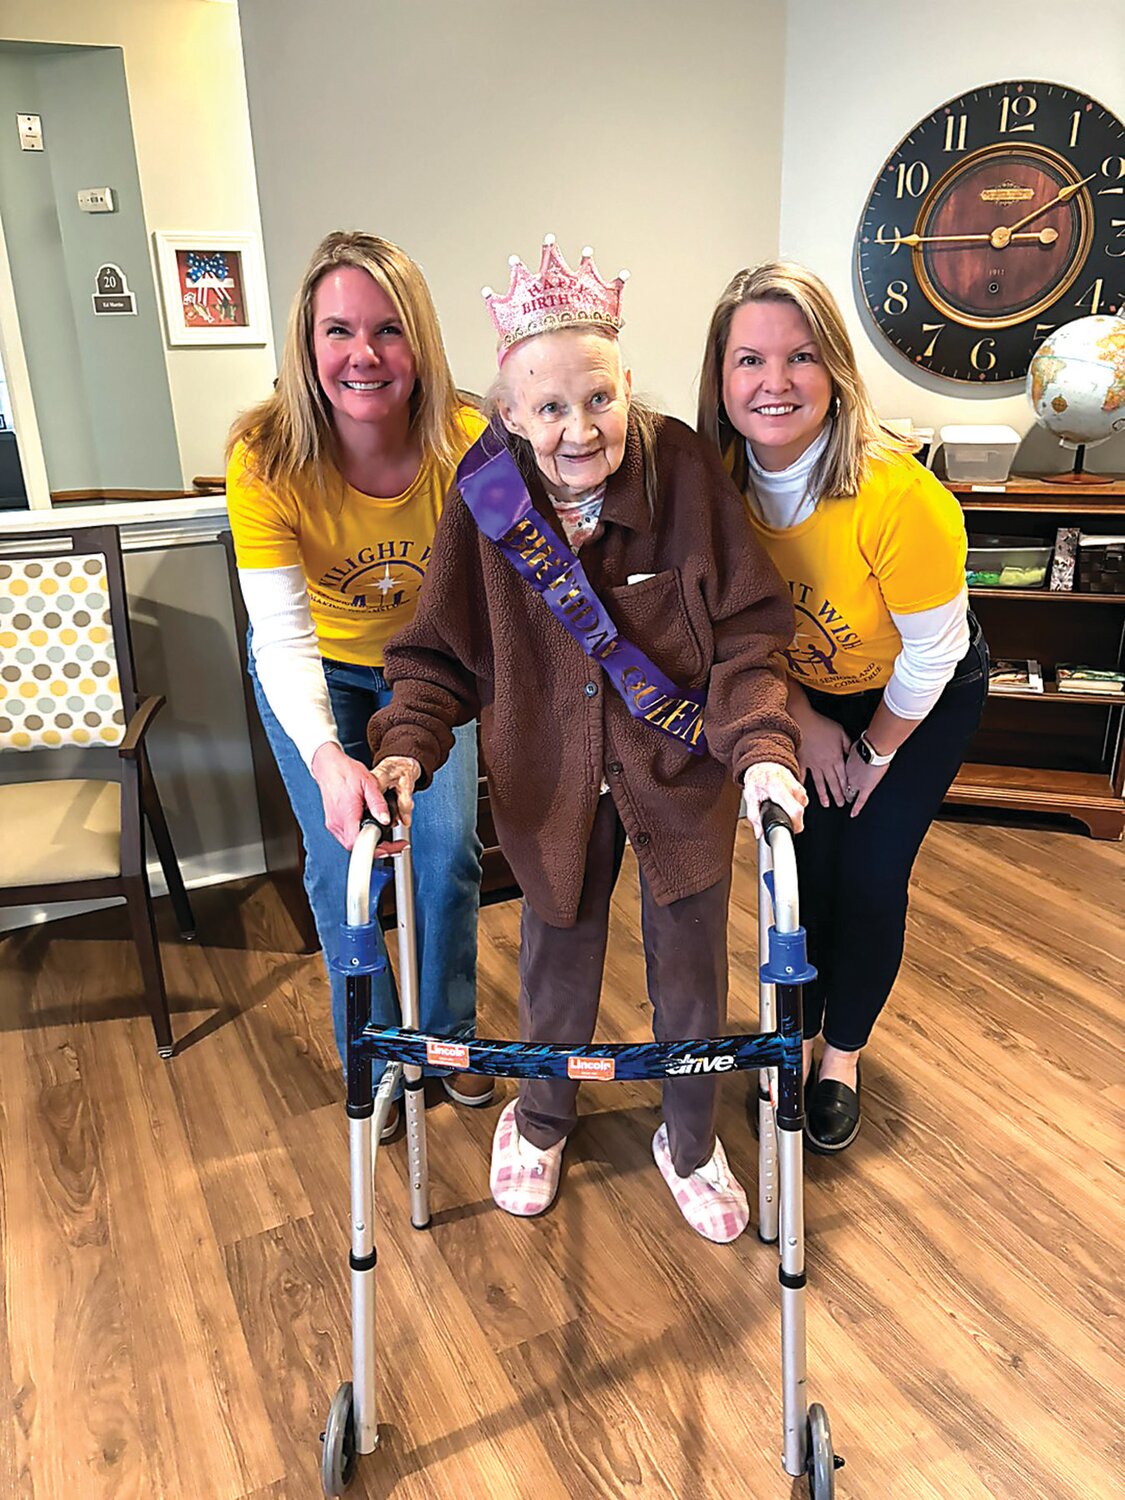 Birthday girl Frances Mollyn, center, smiles with representatives from the Twilight Wish Foundation, Mary Farrell, left, and Cheryl Gustafson, right, during a celebration of her 100th birthday.